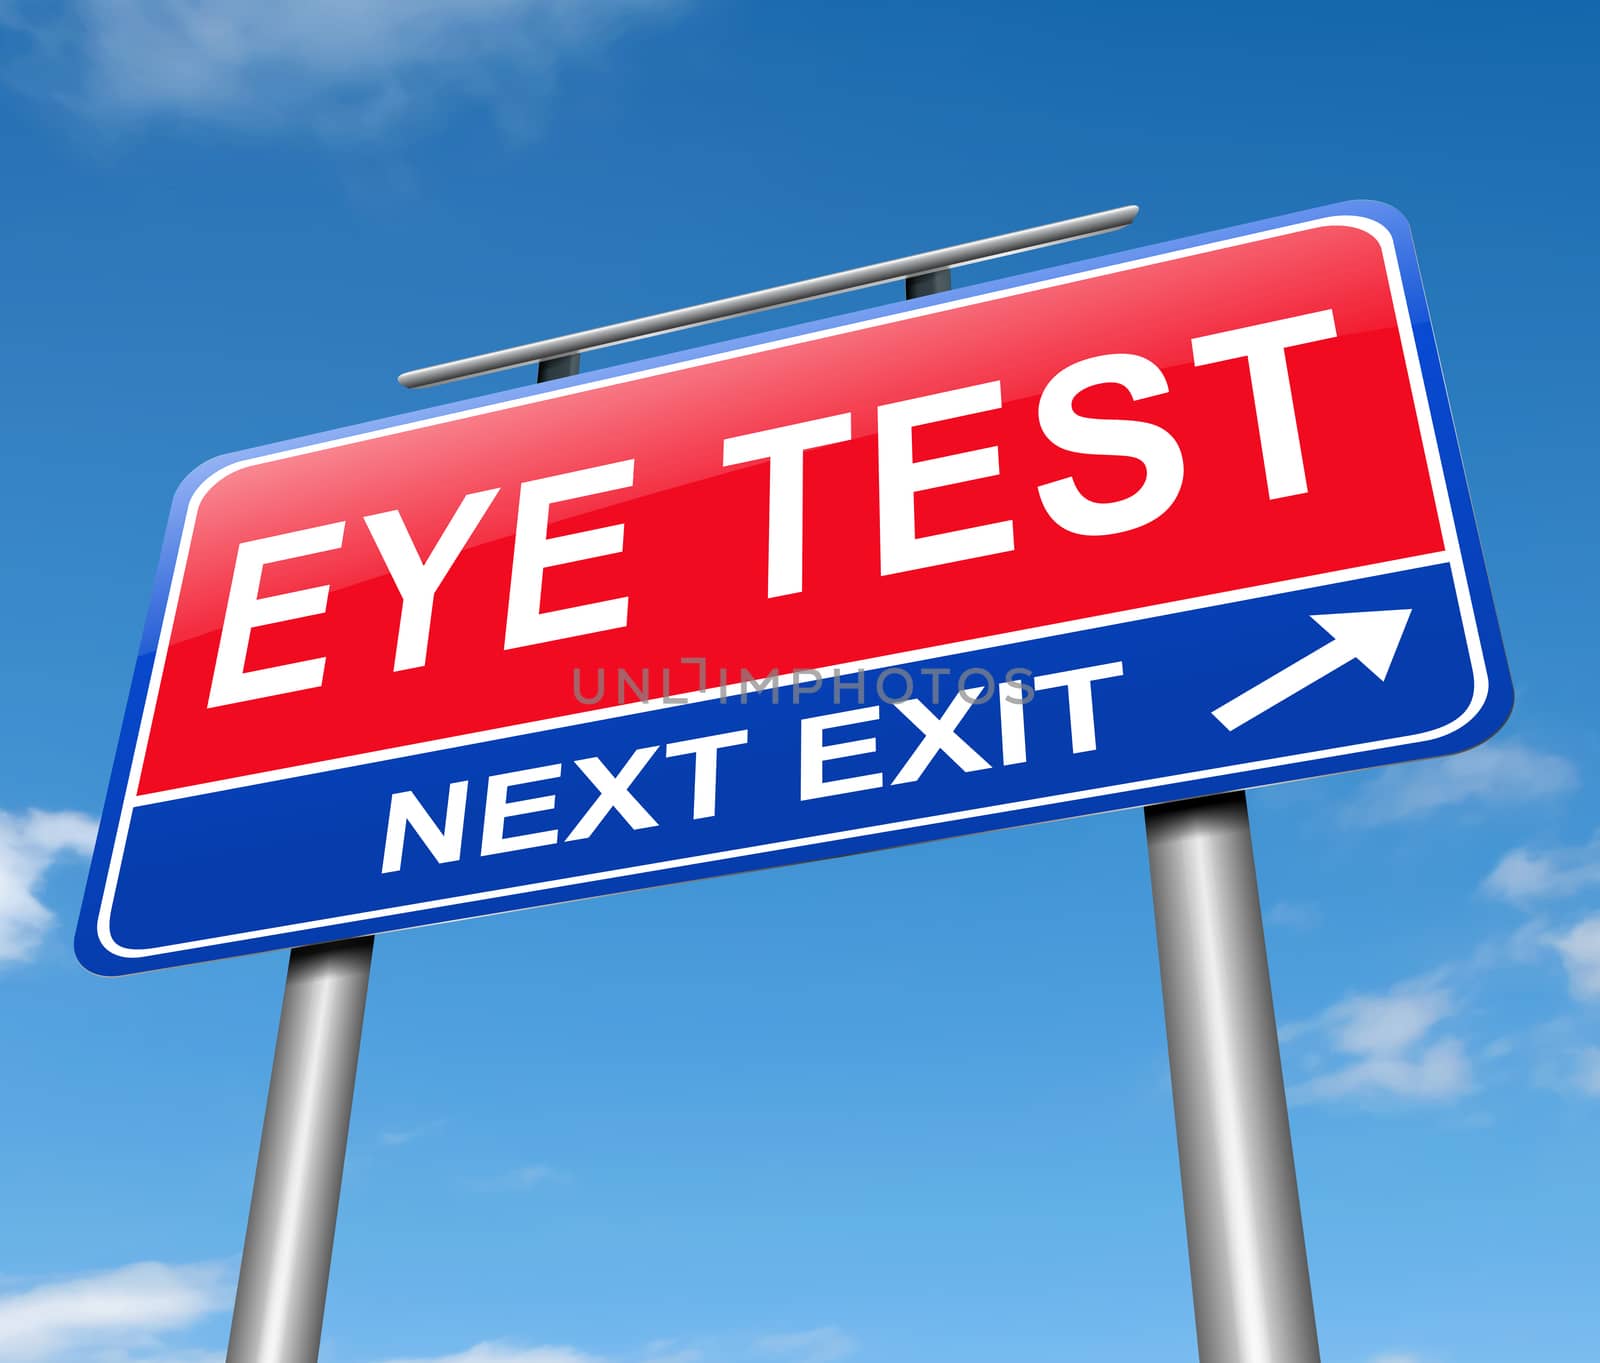 Illustration depicting a sign with am eye test concept.